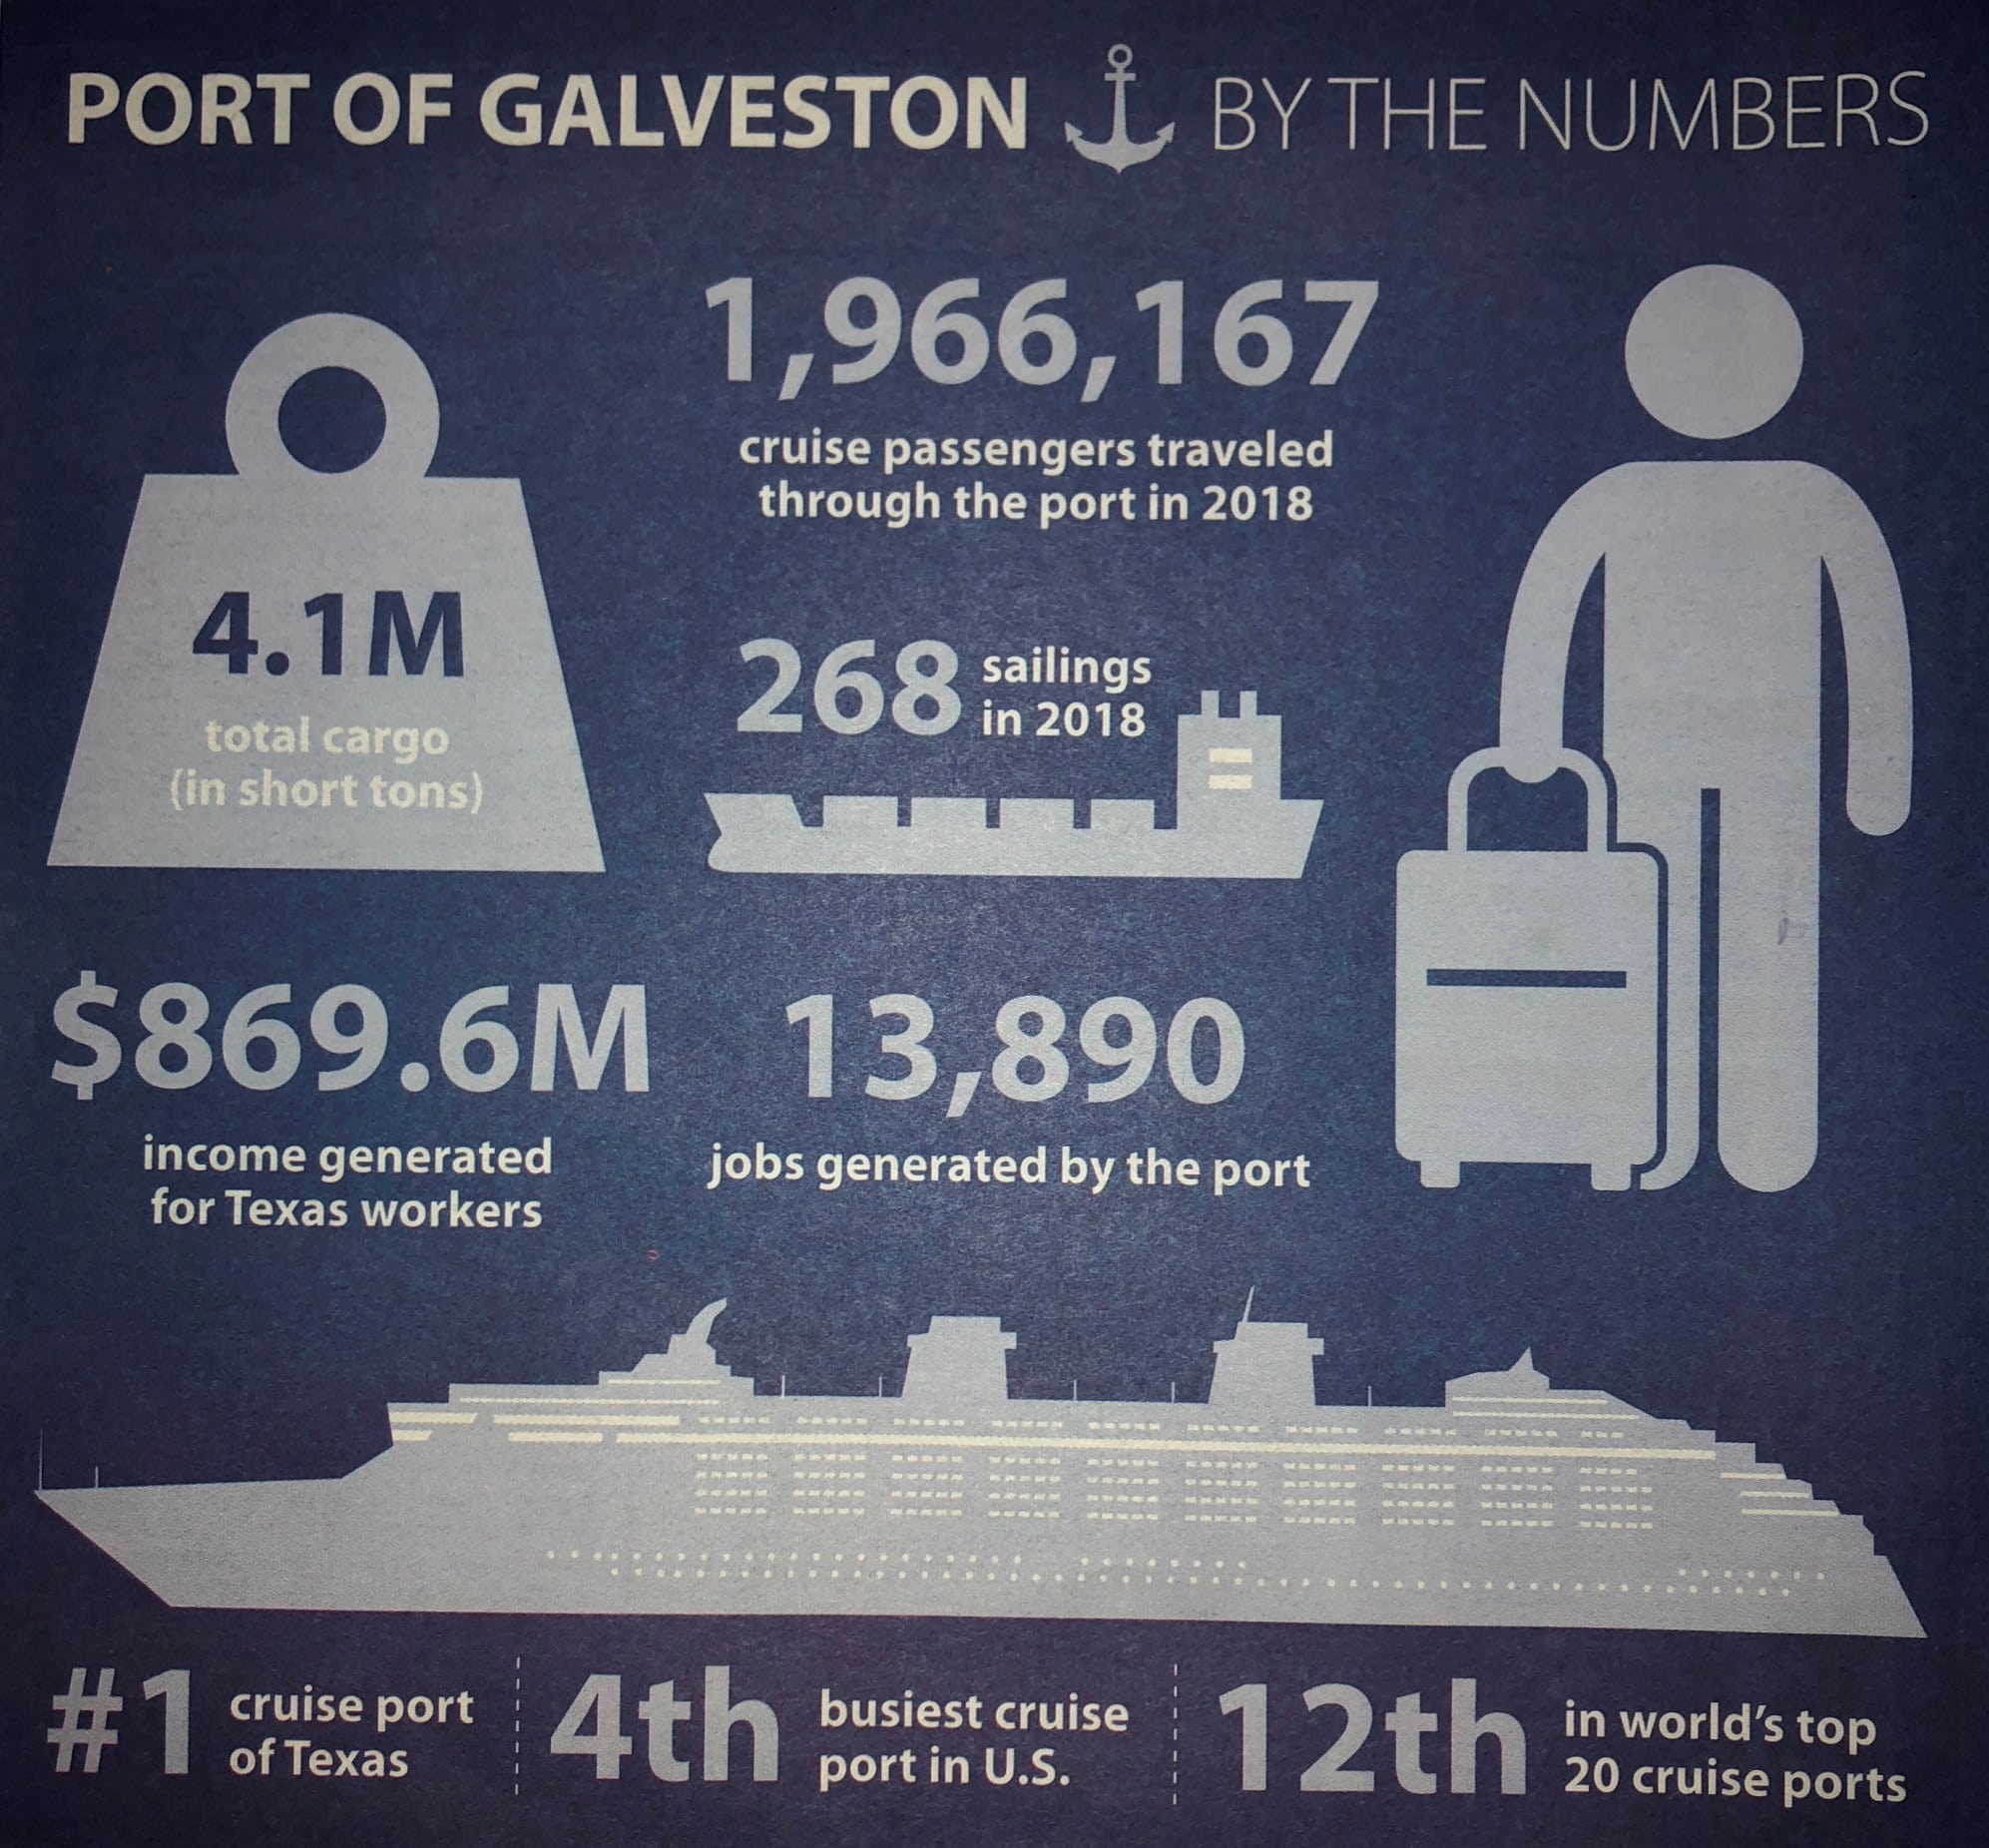 Port of Galveston 2018 year in review